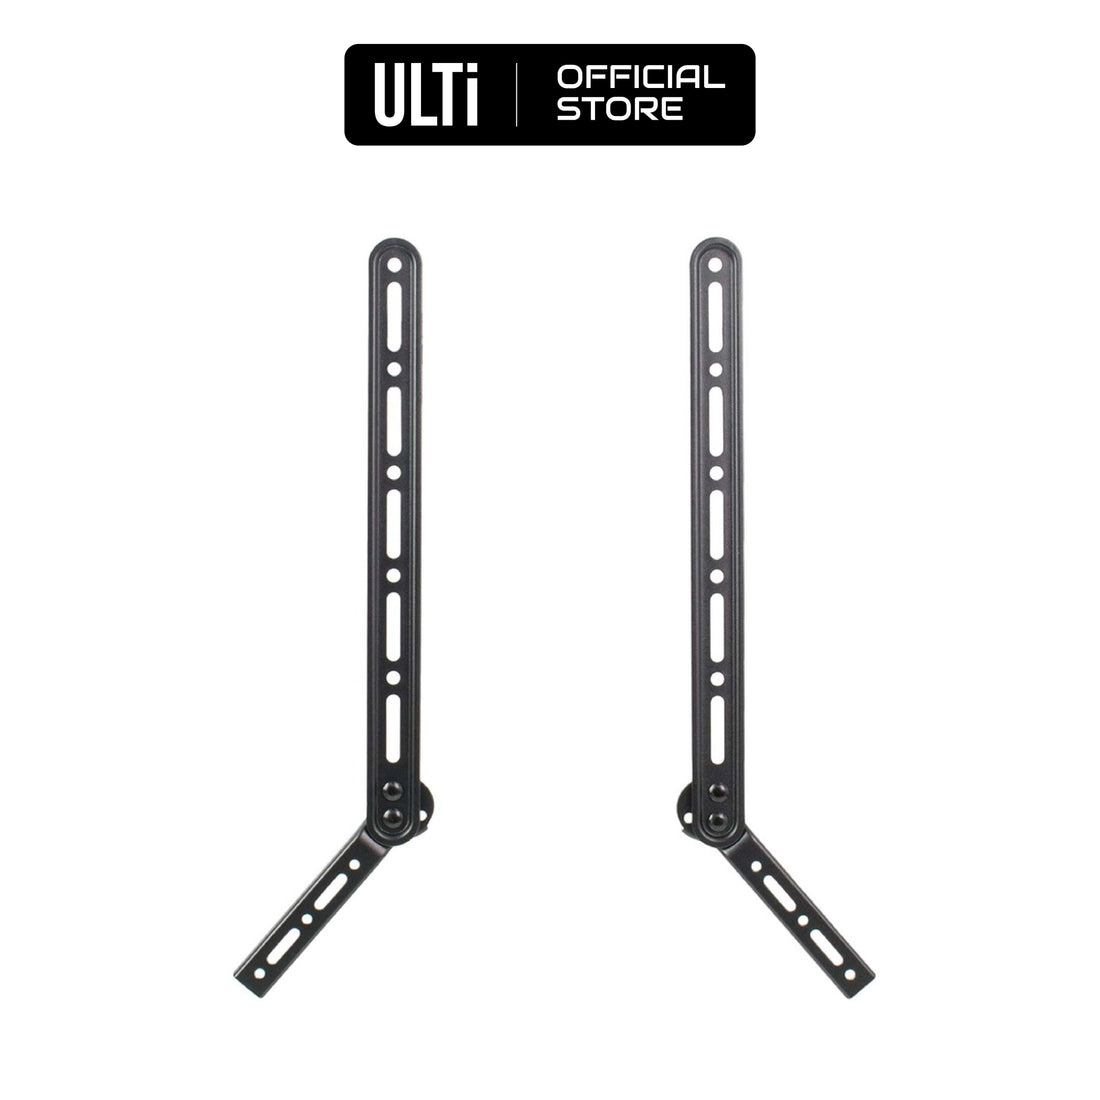 ULTi SoundBar Mount Bracket, for Mounting Above or Under TV, with Adjustable 3 Angled Extension Arm, Fits Up to 65&